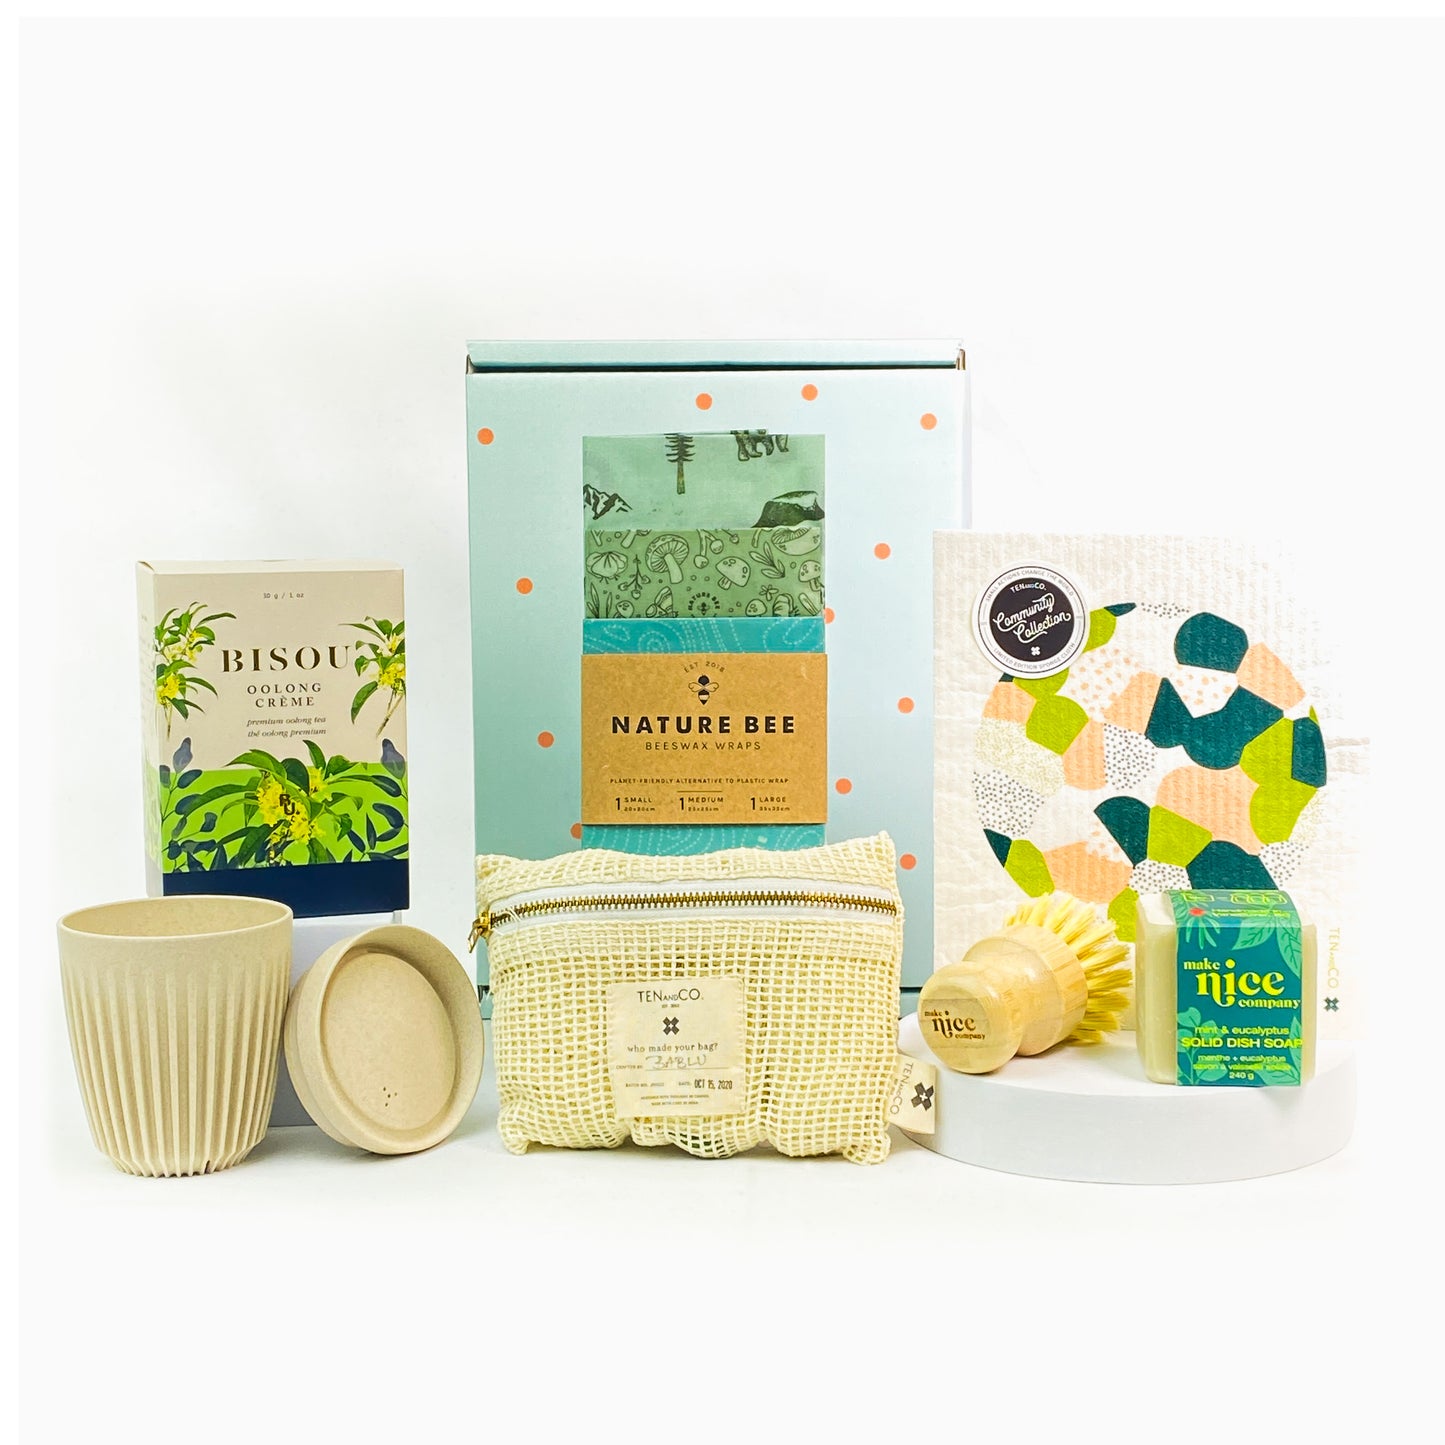 The Sustainable Home Gift Box